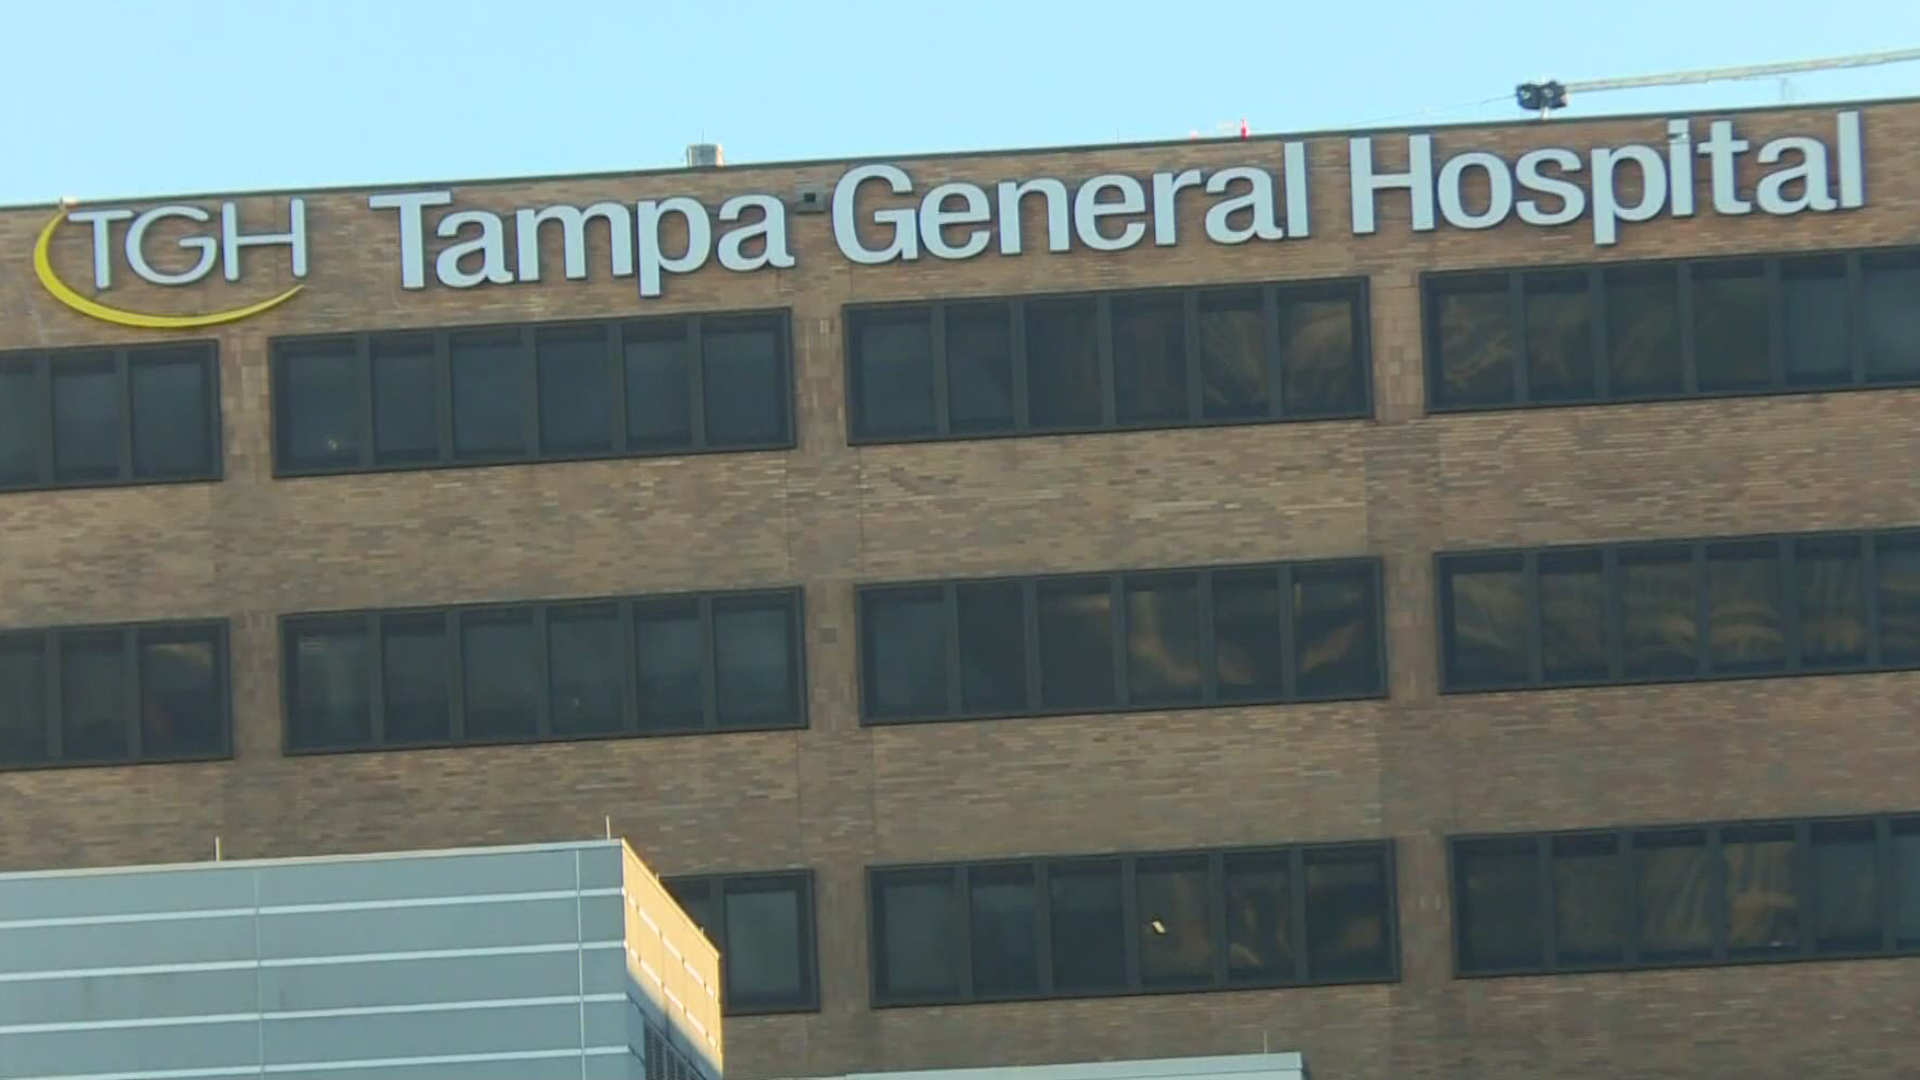 A spokesperson for the hospital confirms the cases saying that 55 of its 8,000 employees have tested positive since early March 2020.